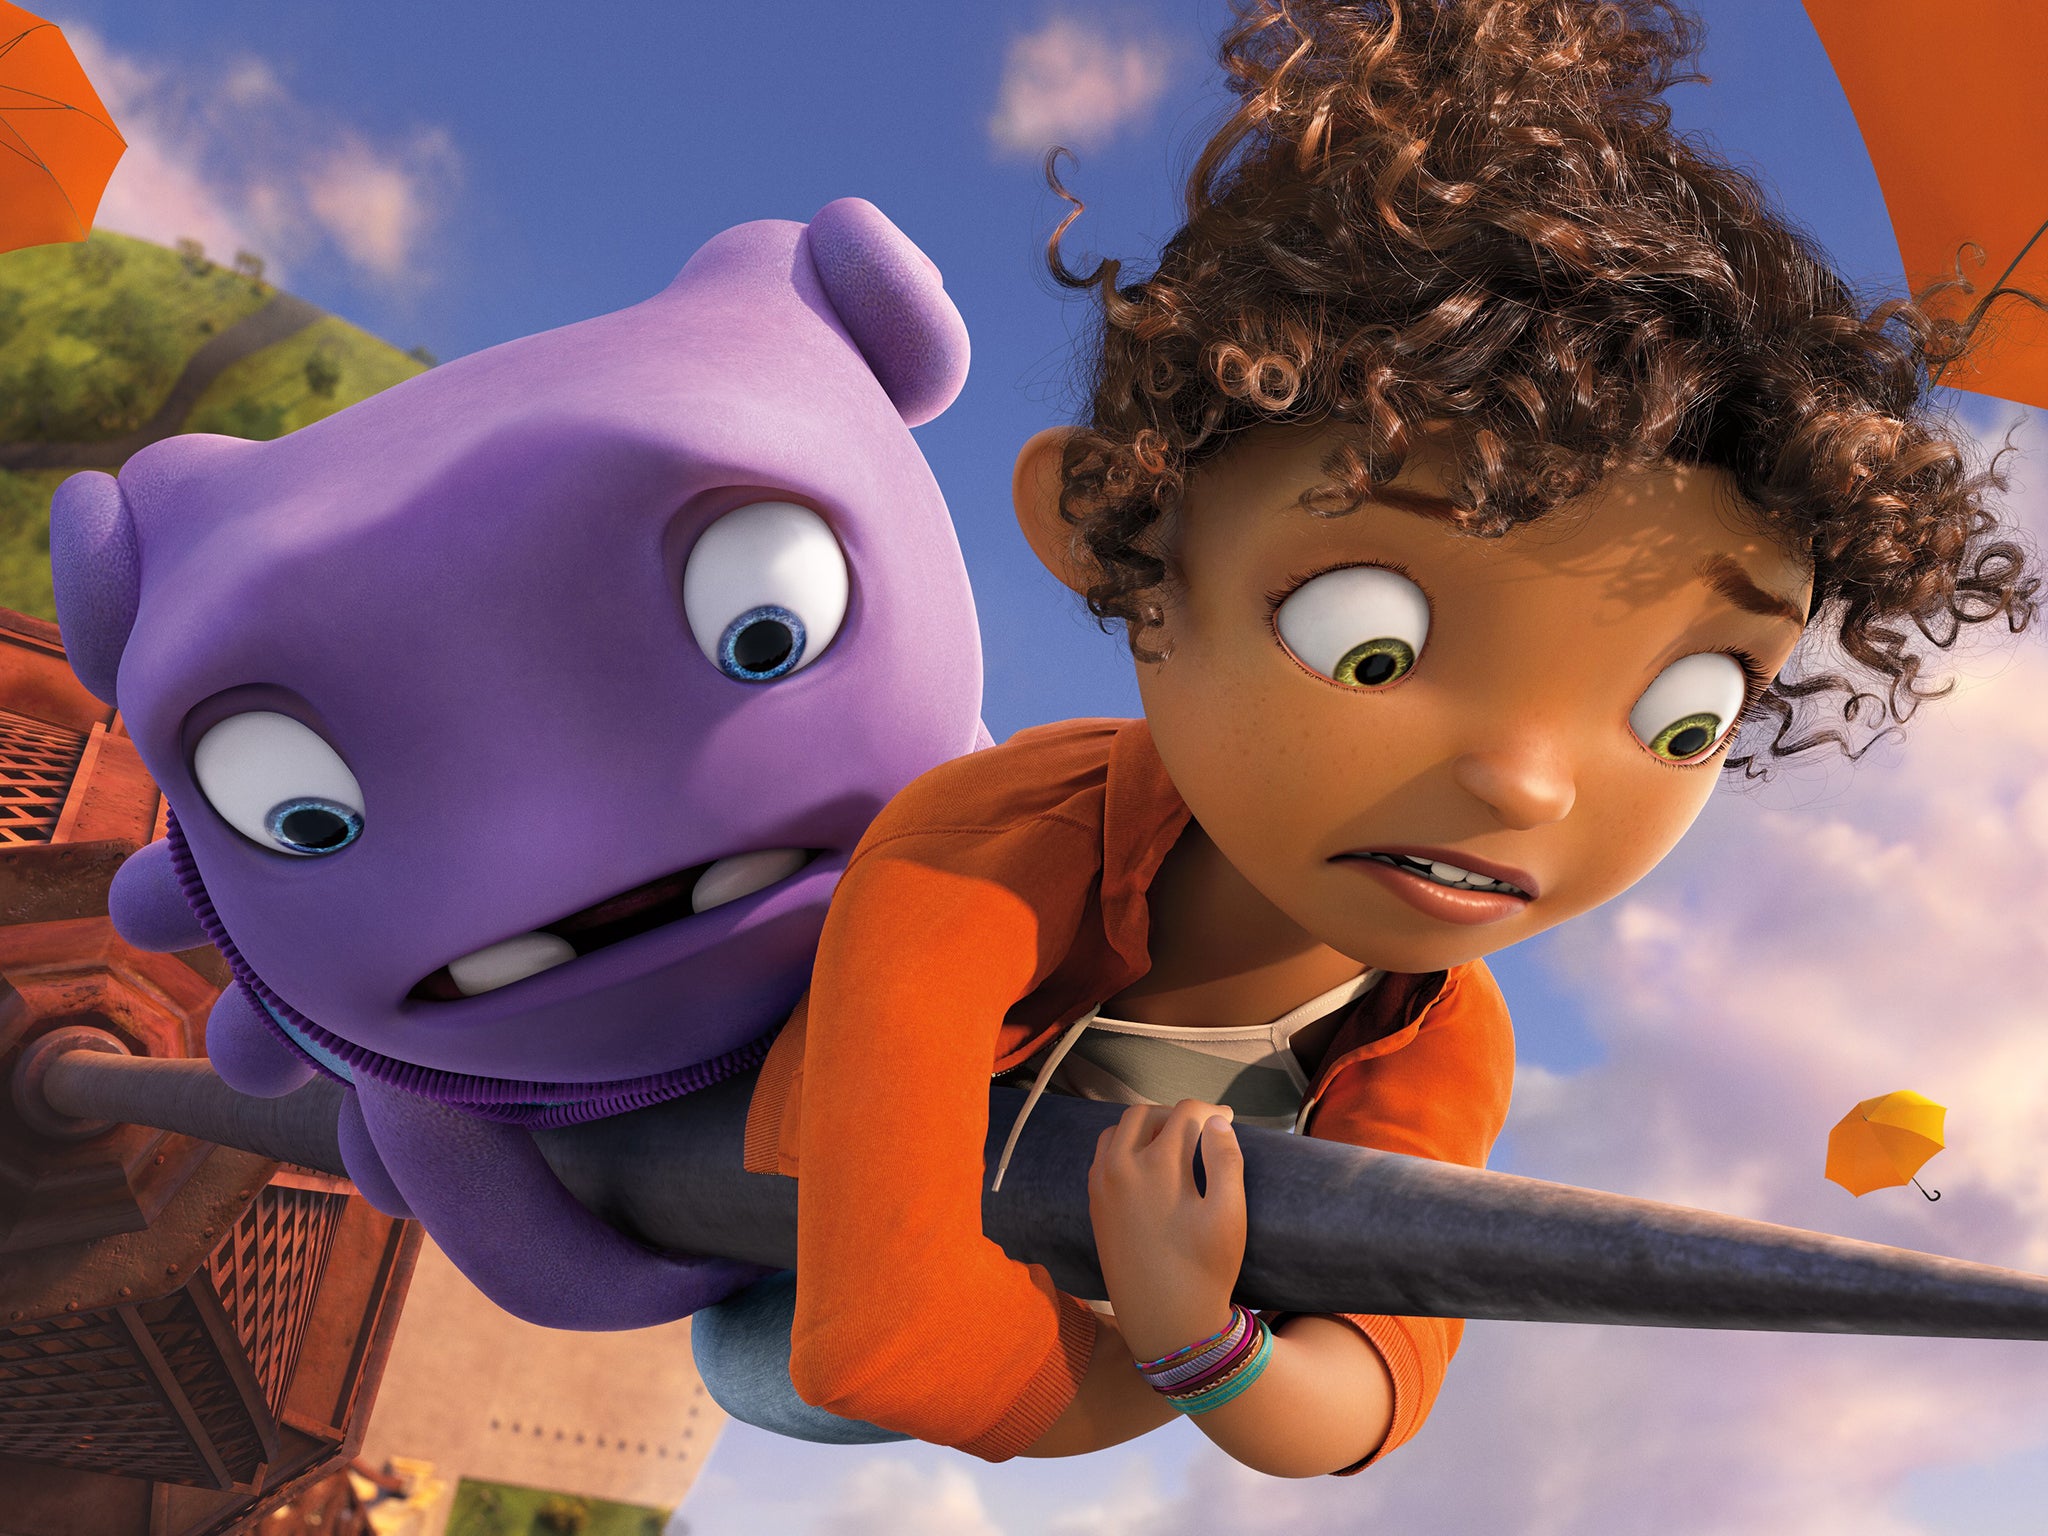 Home: DreamWorks' latest cheery animated feature